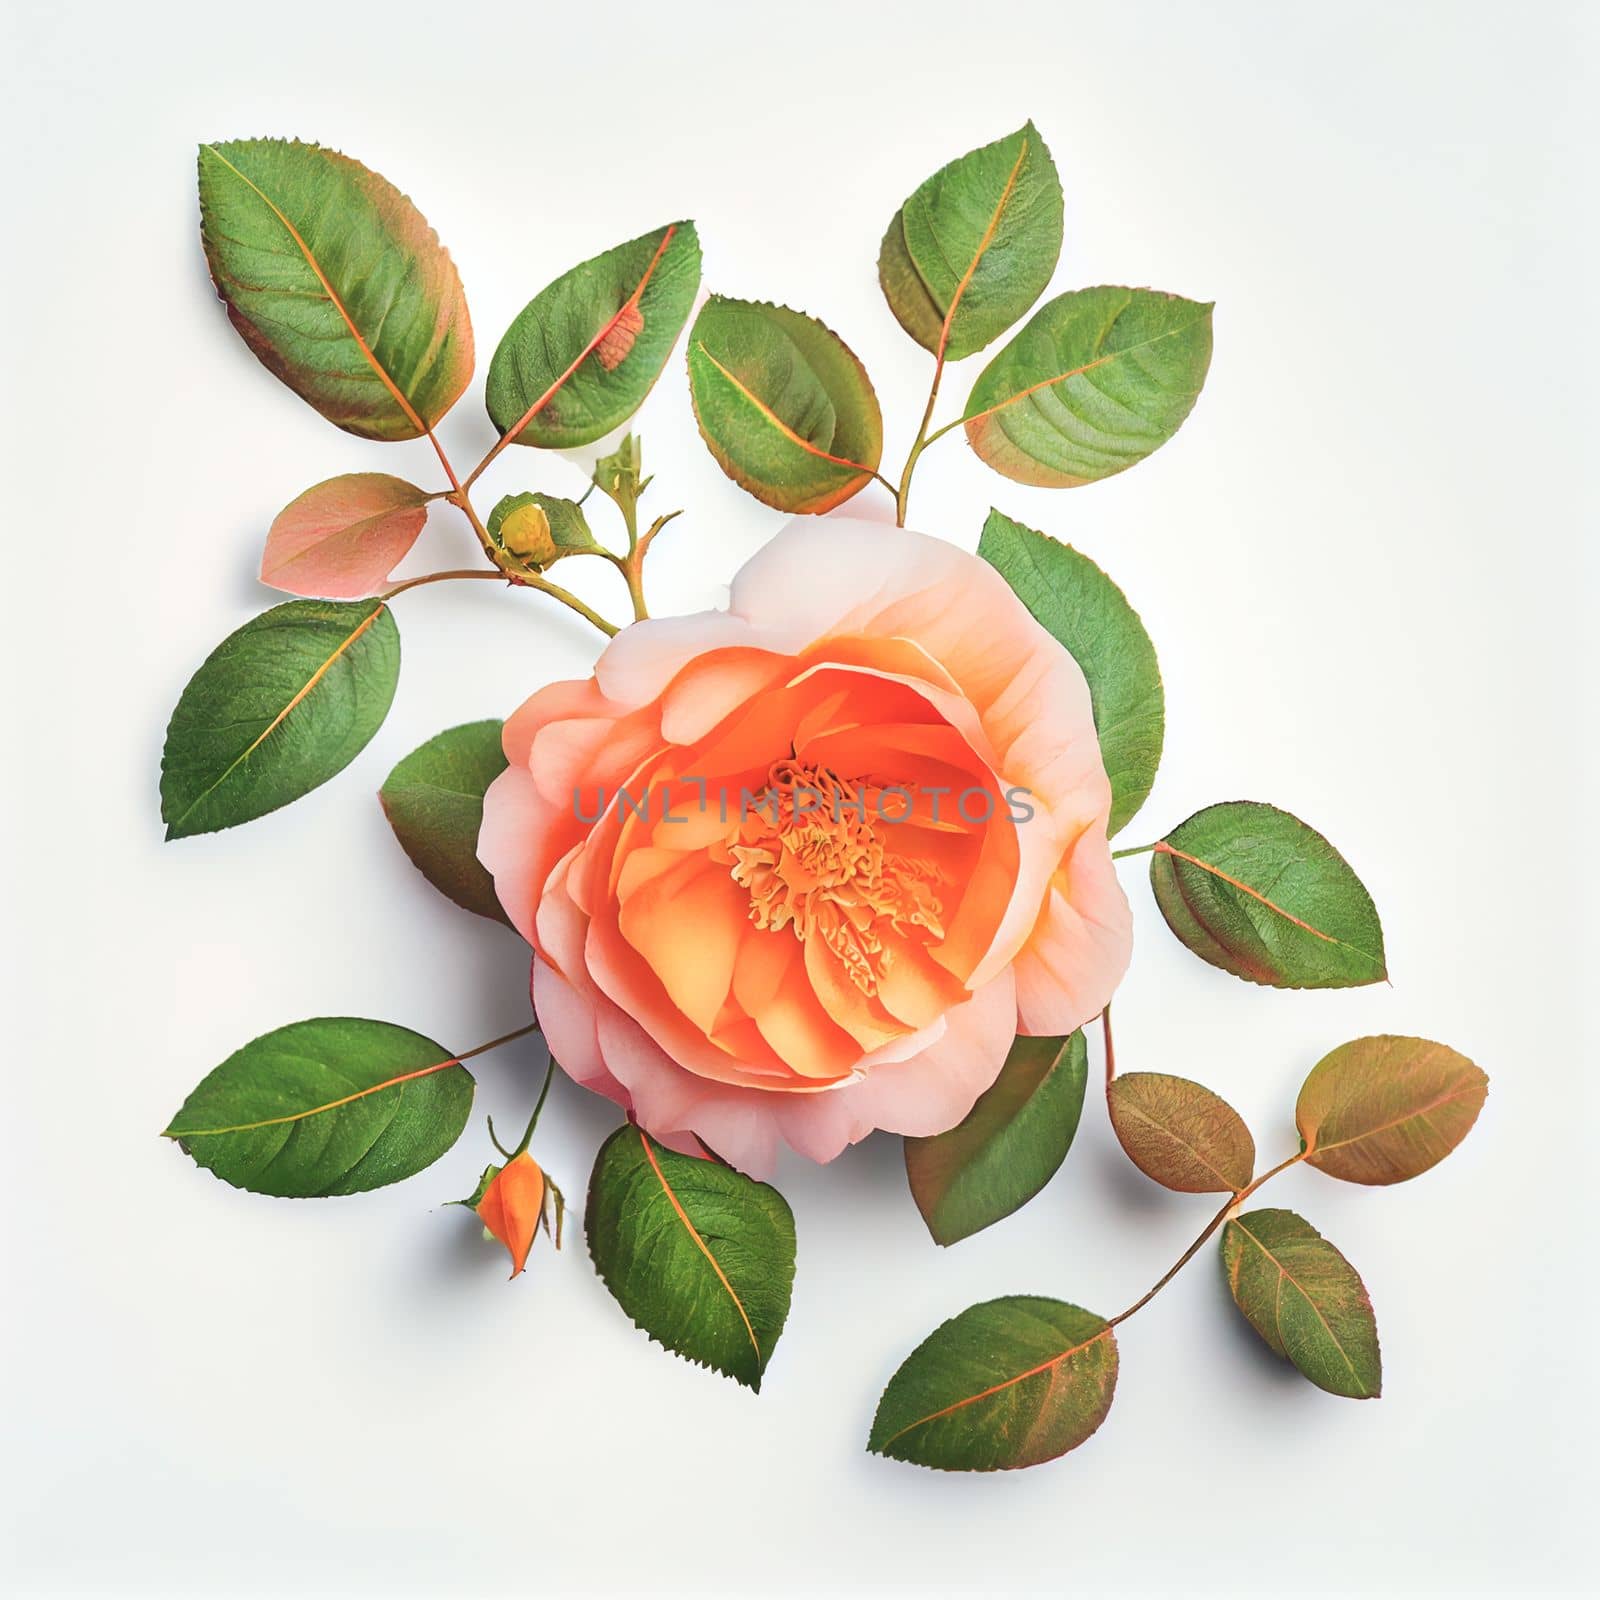 Top view a Tea Rose flower isolated on a white background, suitable for use on Valentine's Day cards, love letters, or springtime designs.